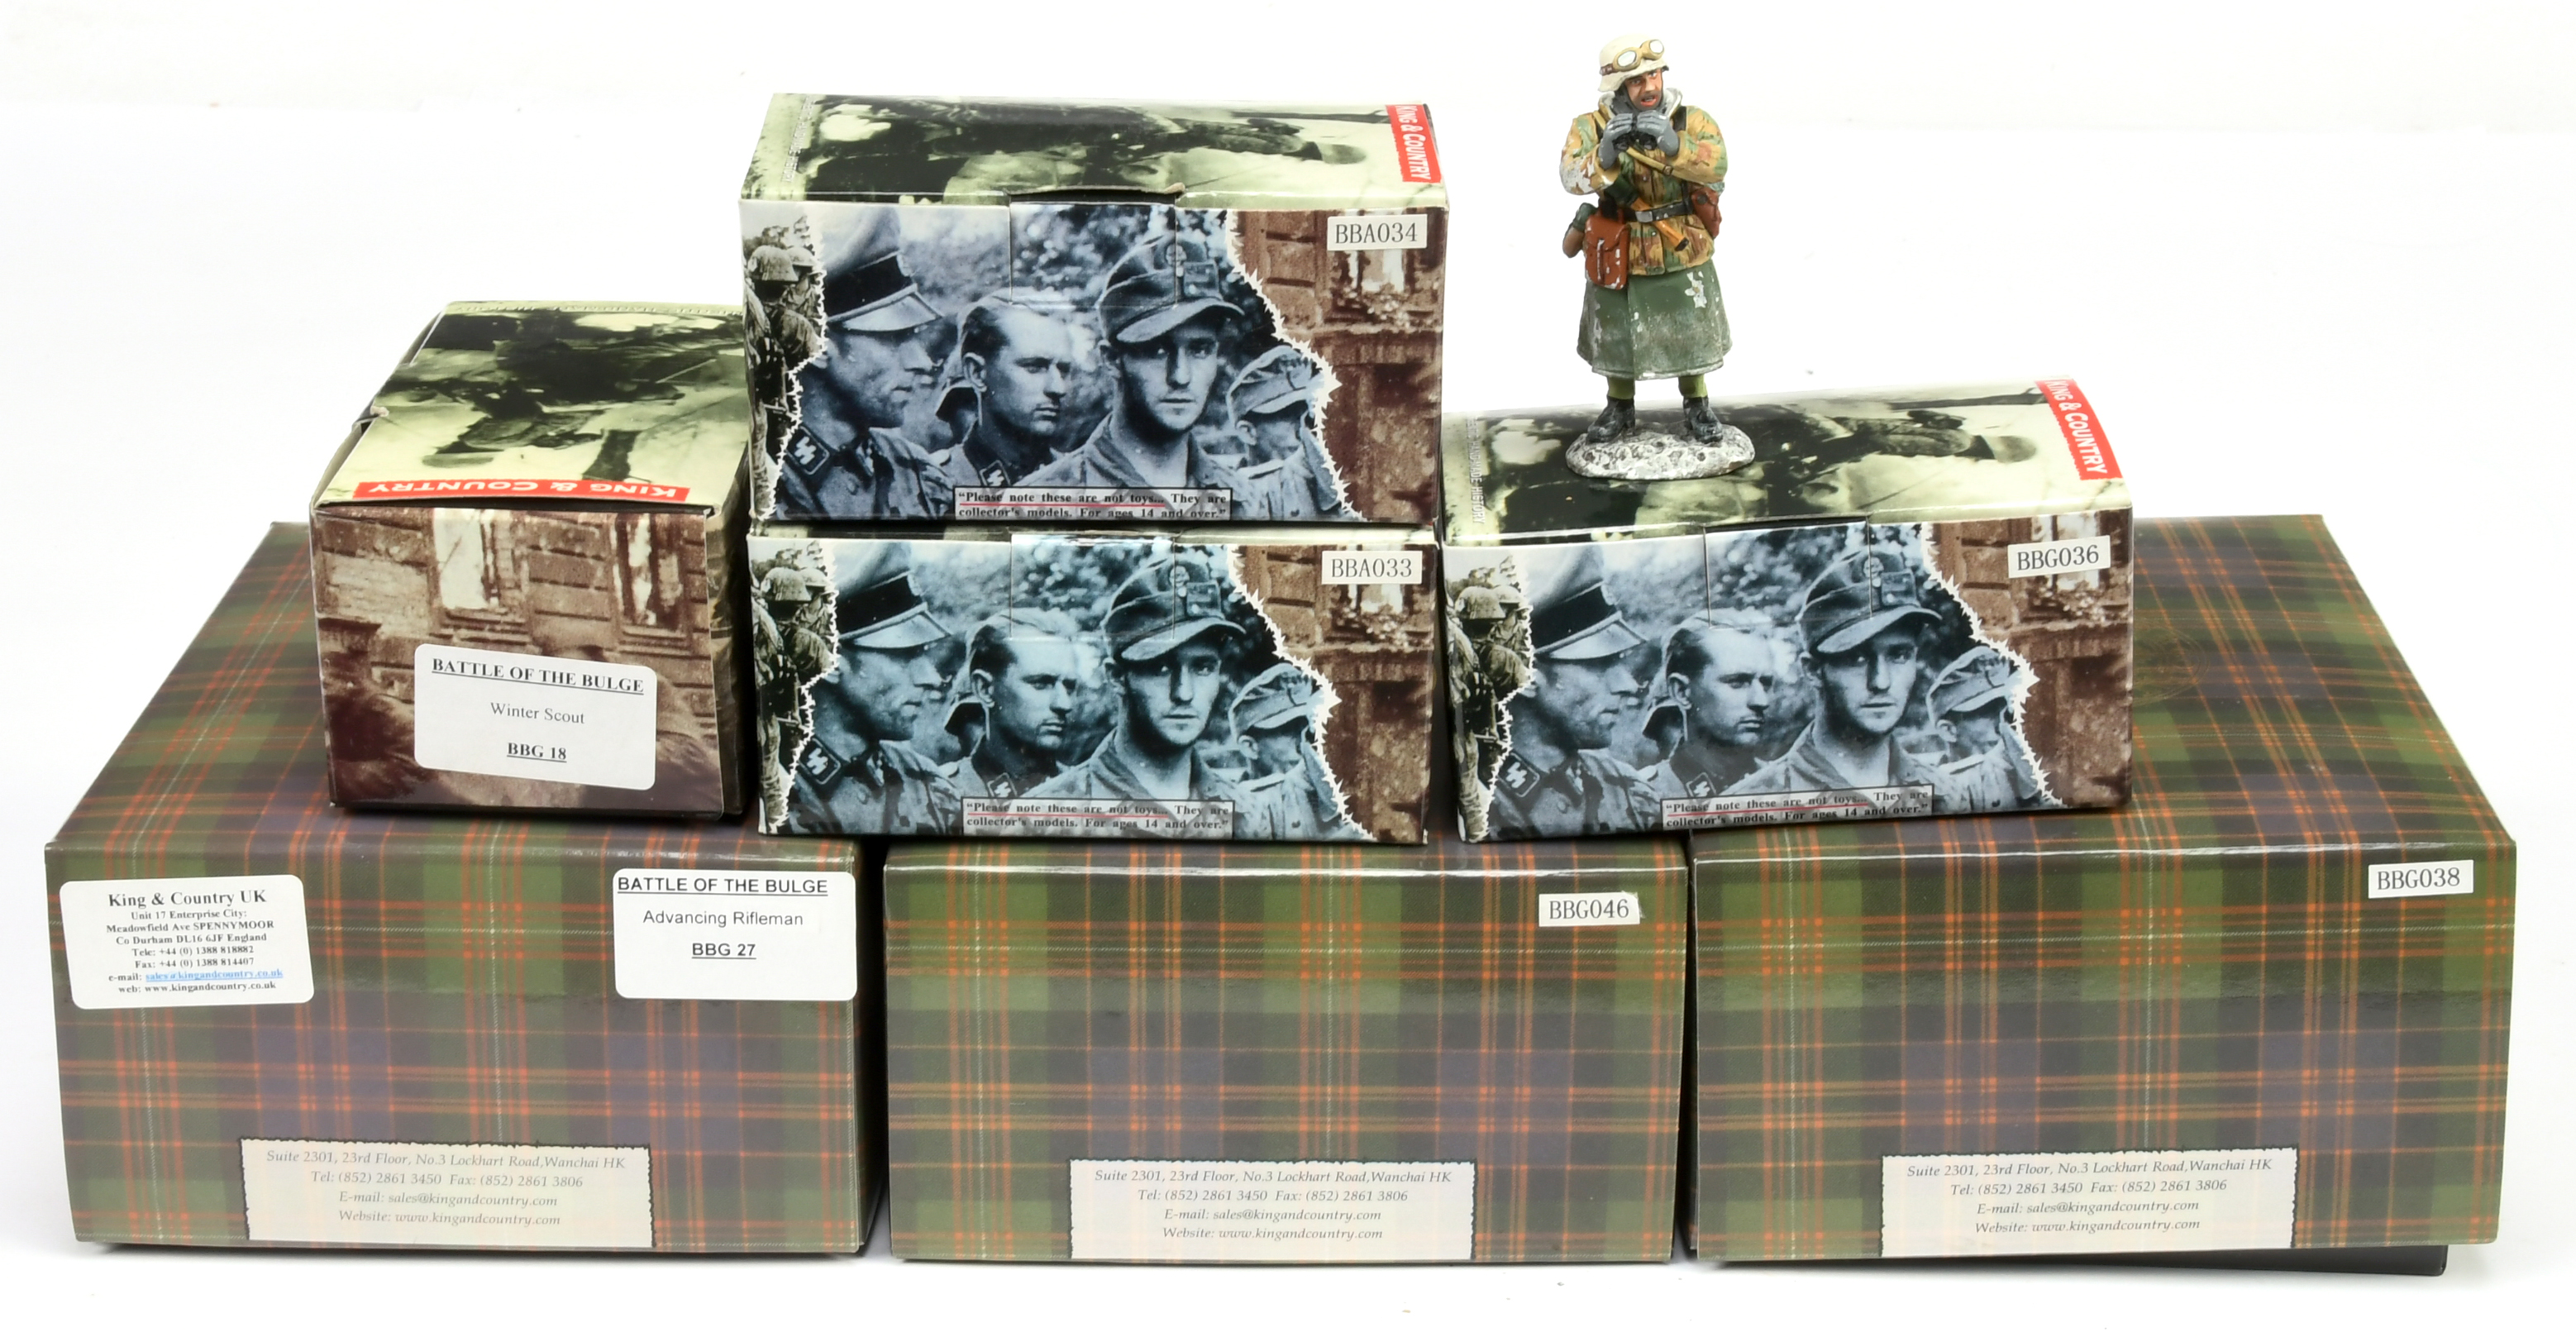 King & Country - Battle of the Bulge Figurine Sets